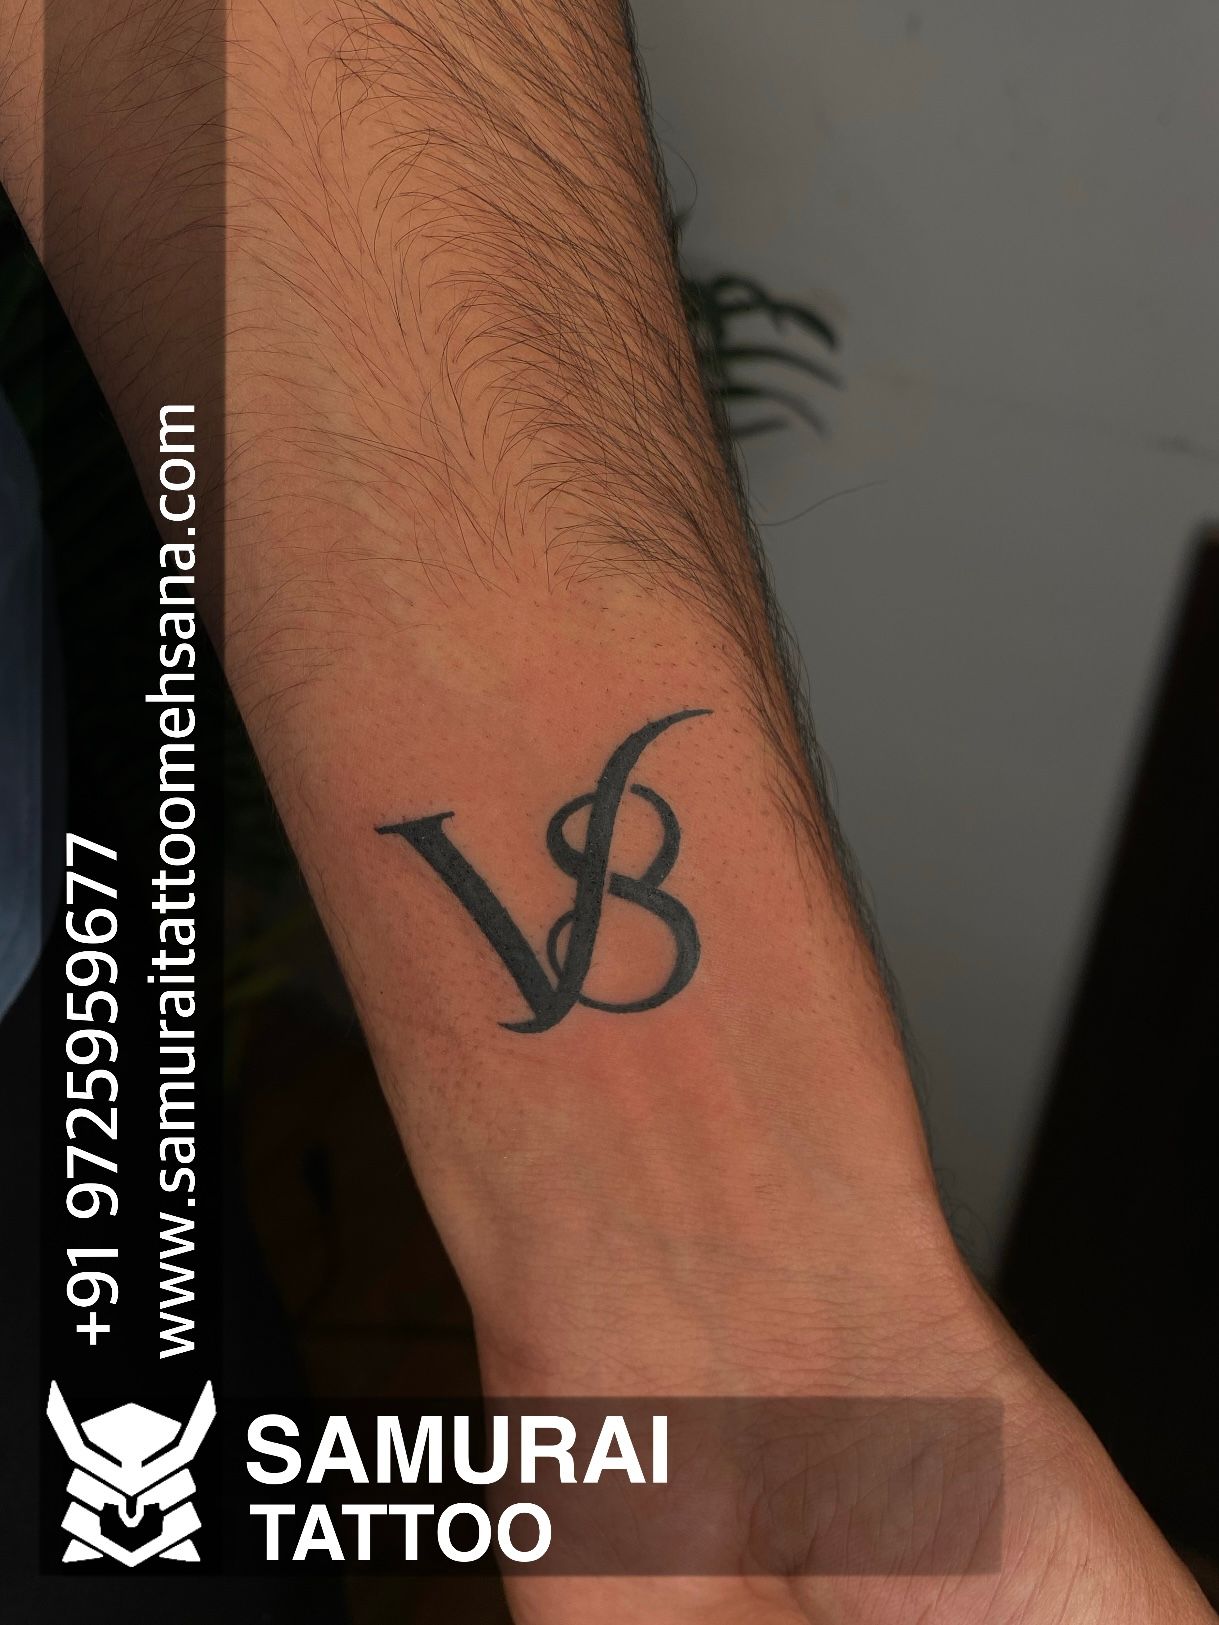 Combining Initials V and K with a Heart | Cool Tattoo Design Ideas - YouTube